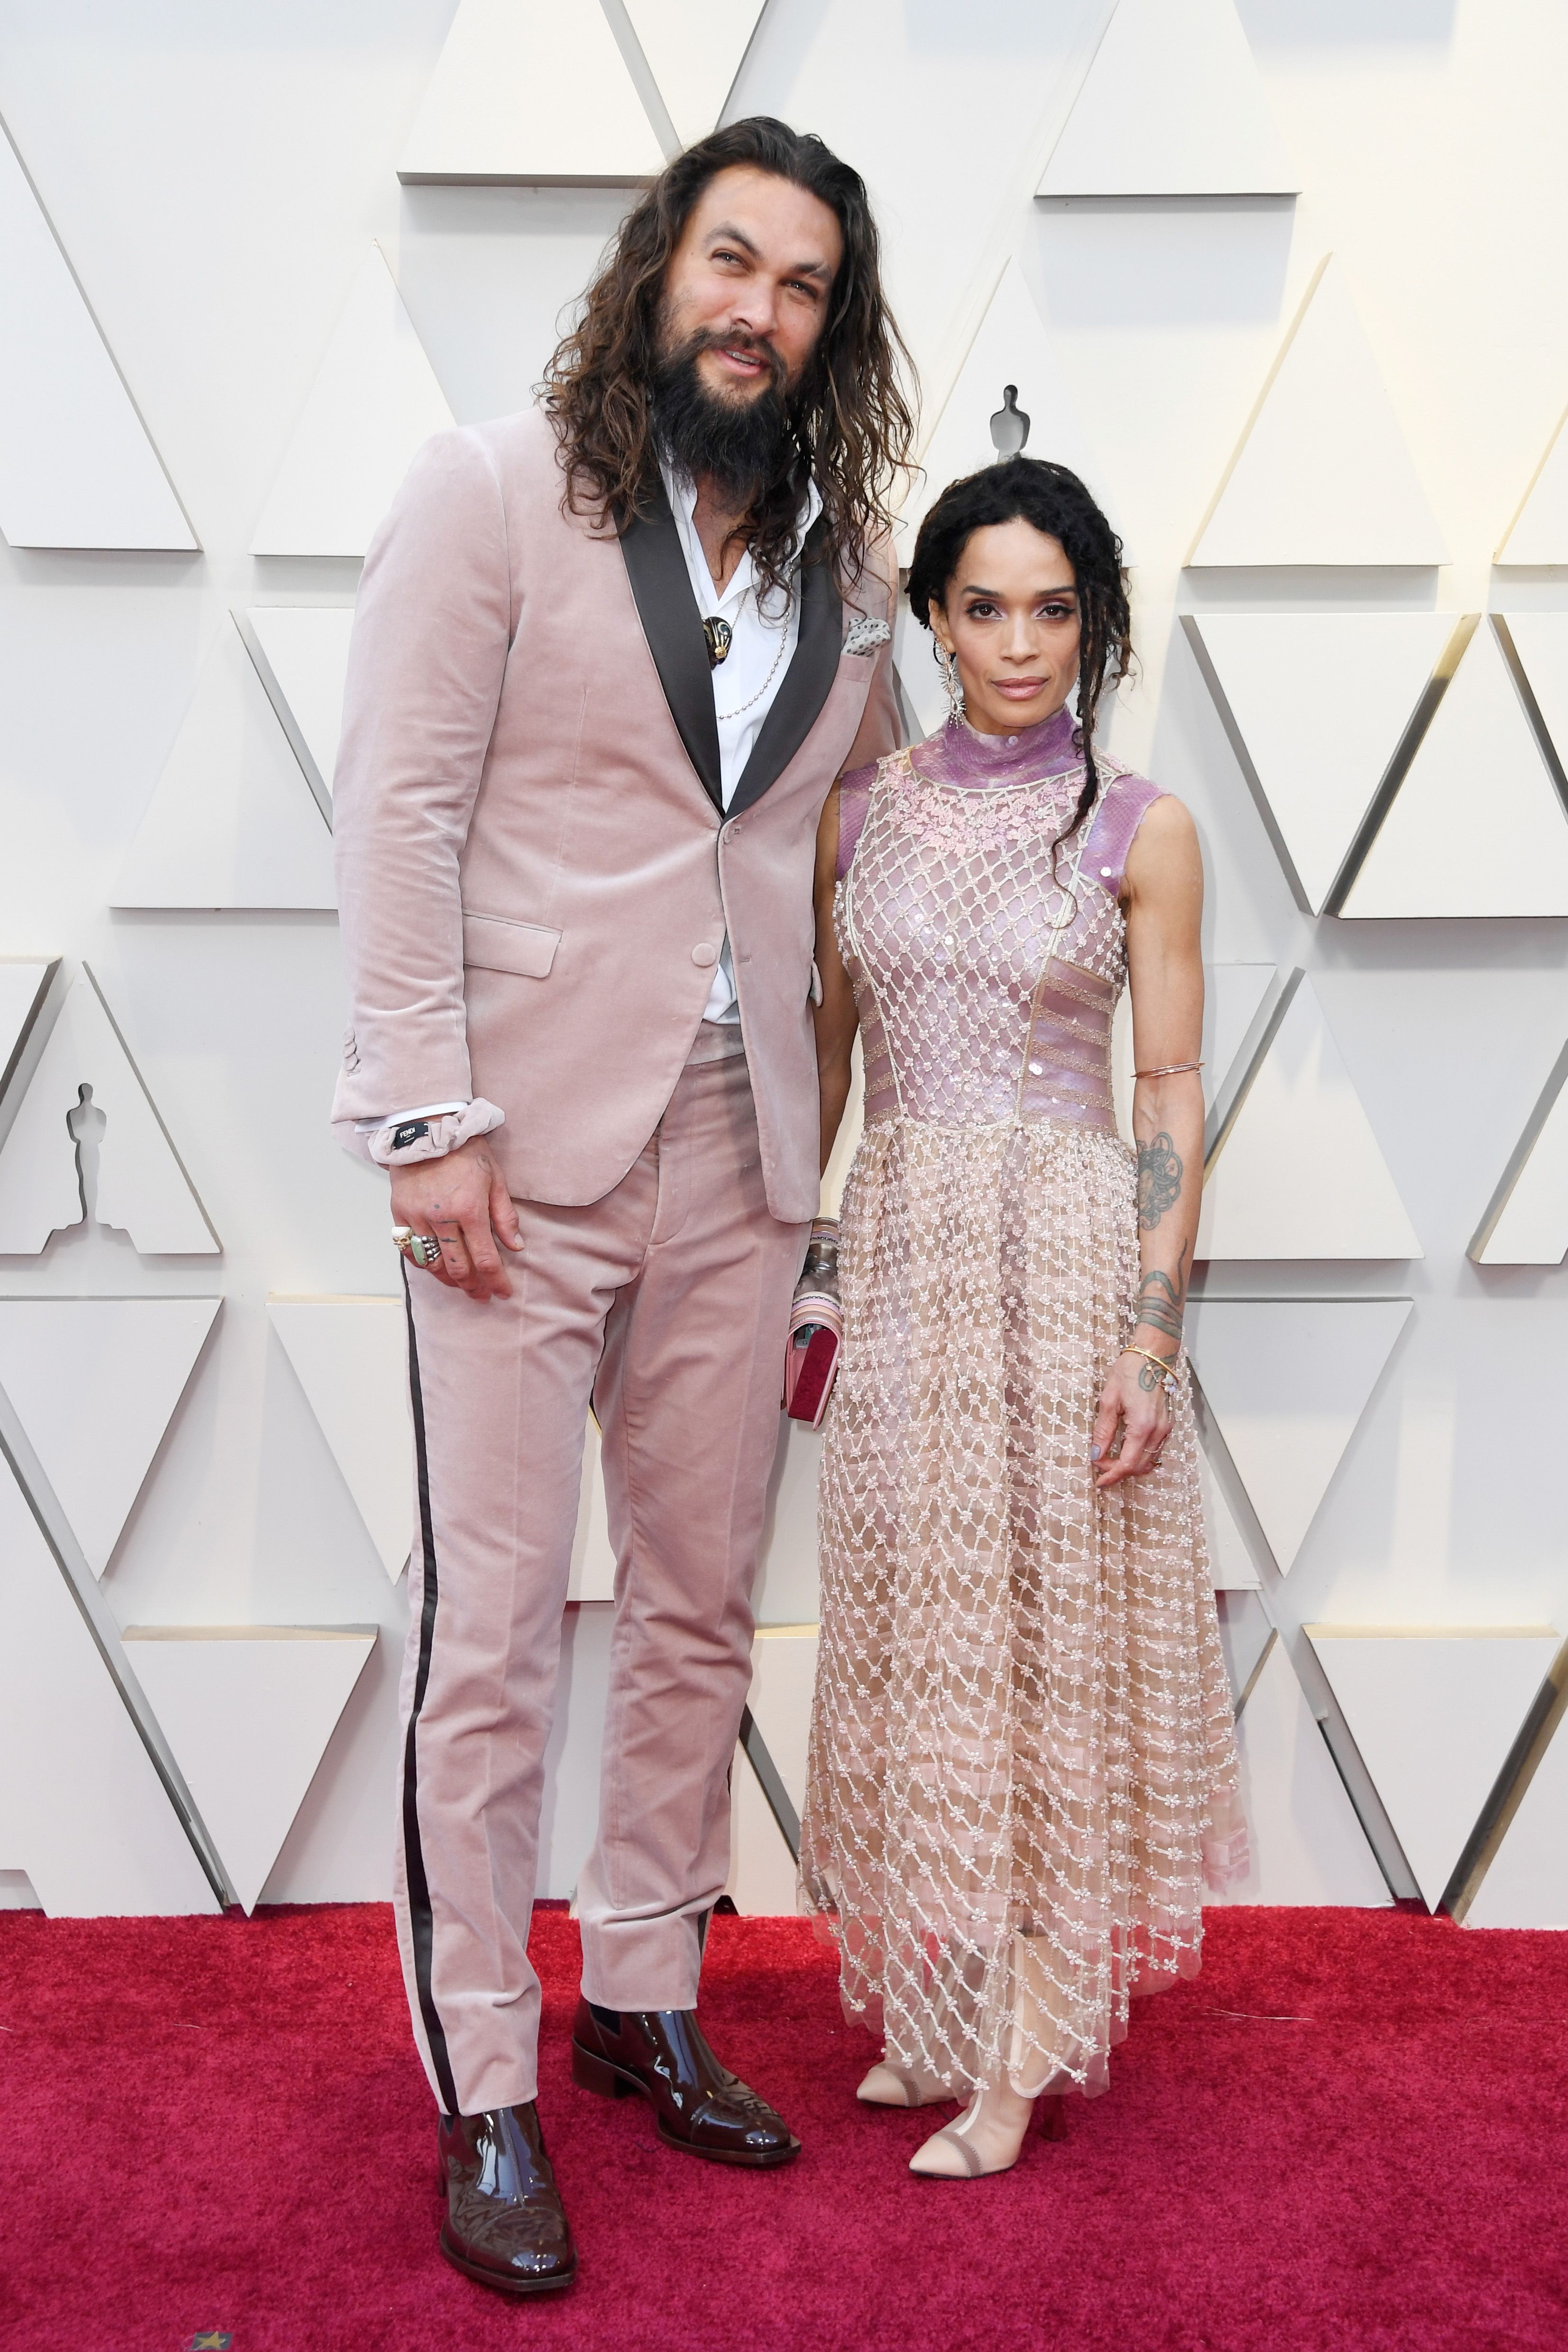 Lisa Bonet and Jason Momoa at the 91st Annual Academy Awards in 2019 in Hollywood | Source: Getty Images